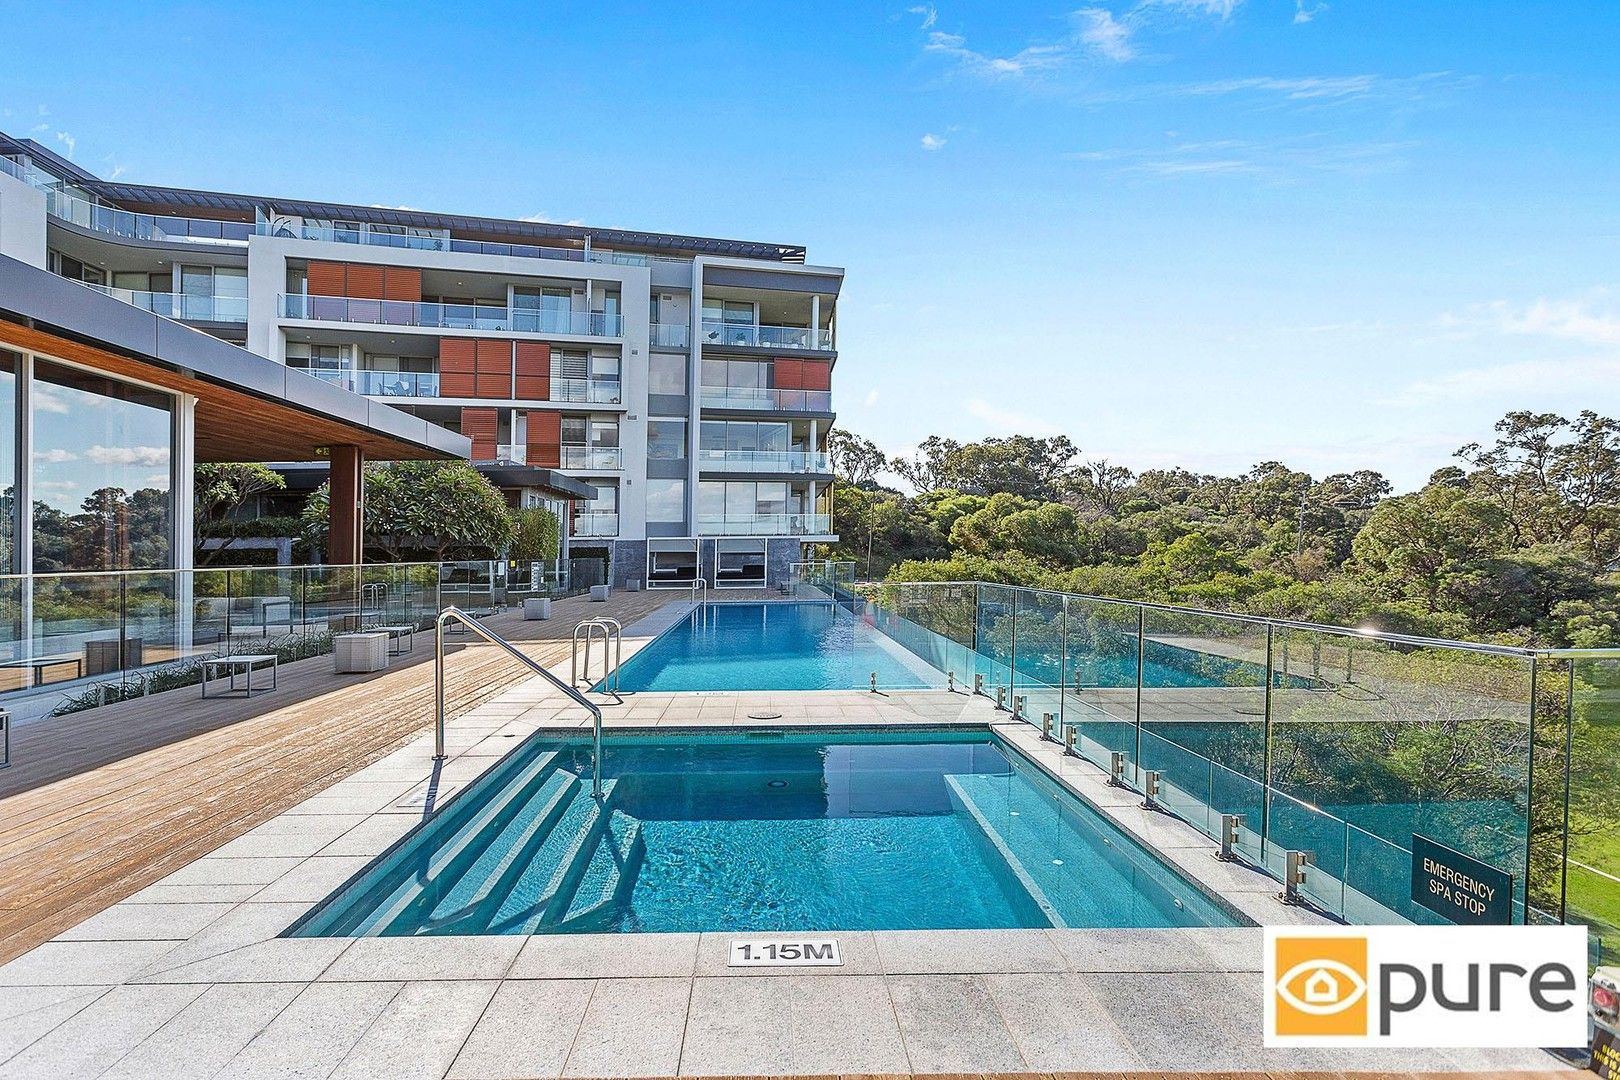 2 bedrooms Apartment / Unit / Flat in 137/2 Milyarn Rise SWANBOURNE WA, 6010